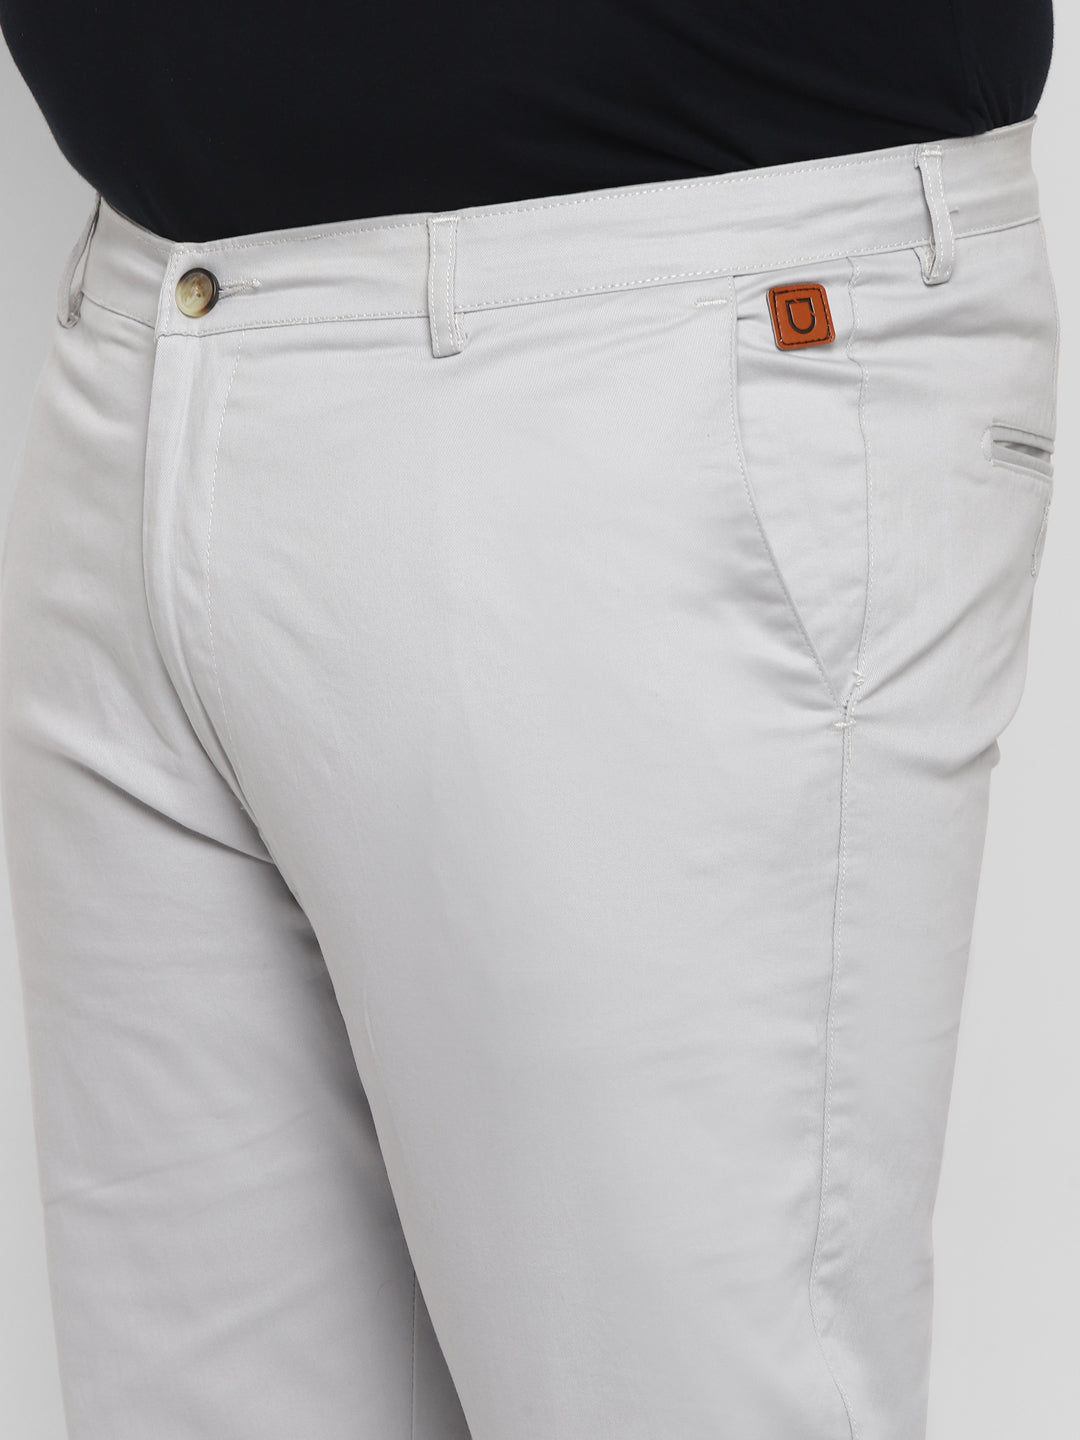 Plus Men's White Grey Cotton Regular Fit Casual Chinos Trousers Stretch